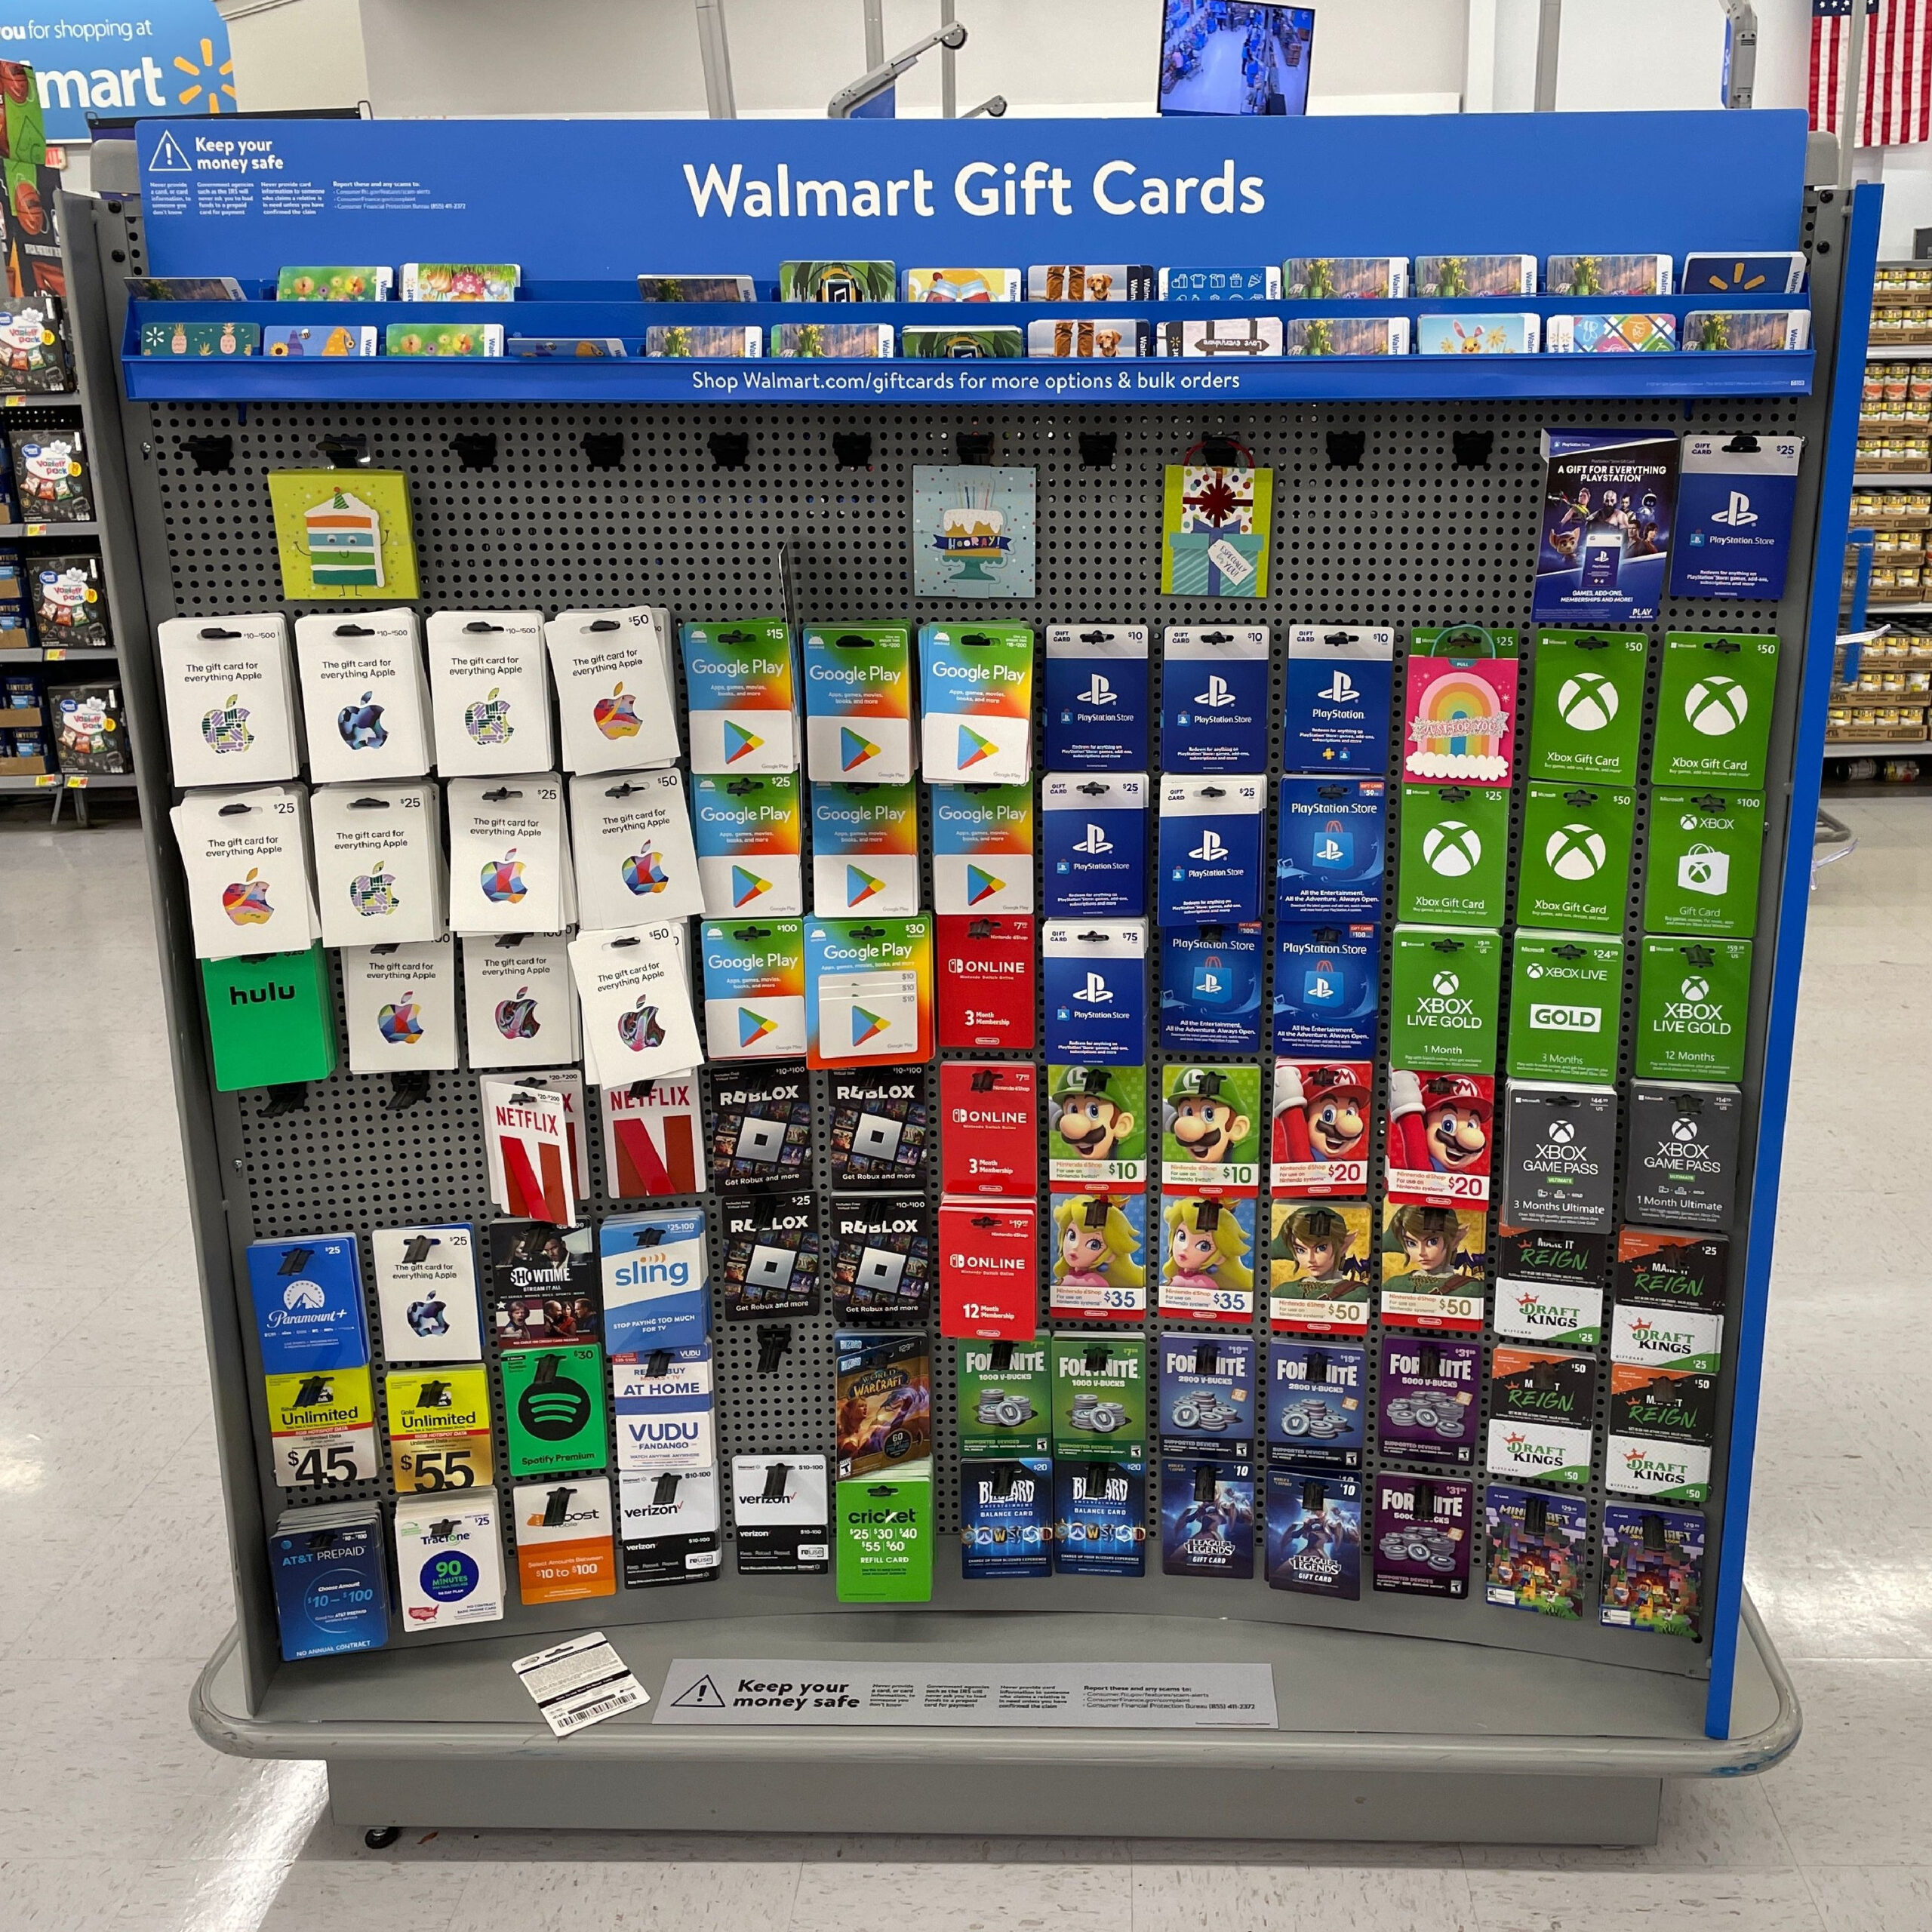 Walmart Must Pay Customers $4M After Gift Card Scheme Find Out How To